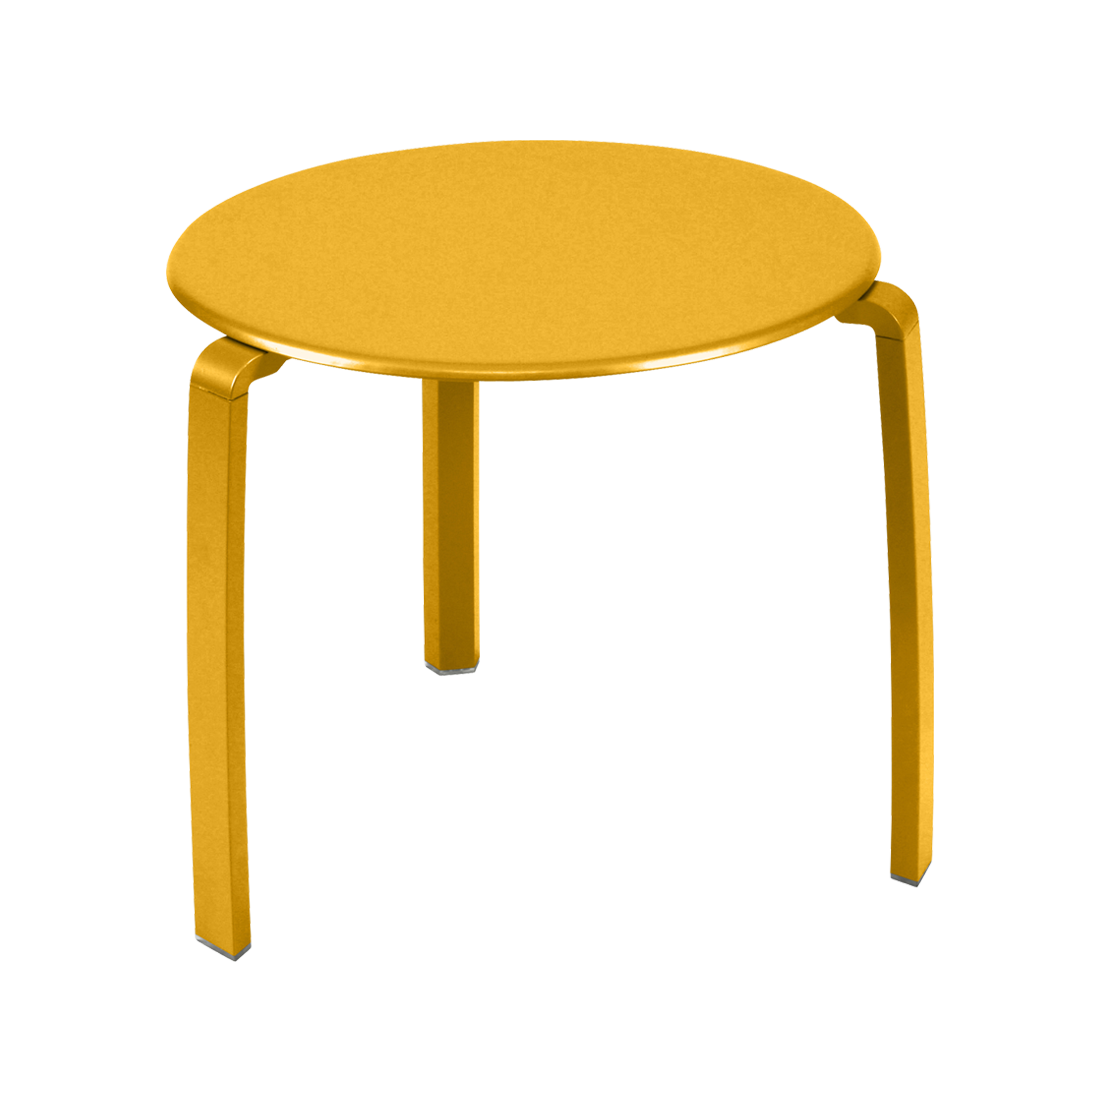 table basse alize, table basse fermob, table basse metal, table basse jaune